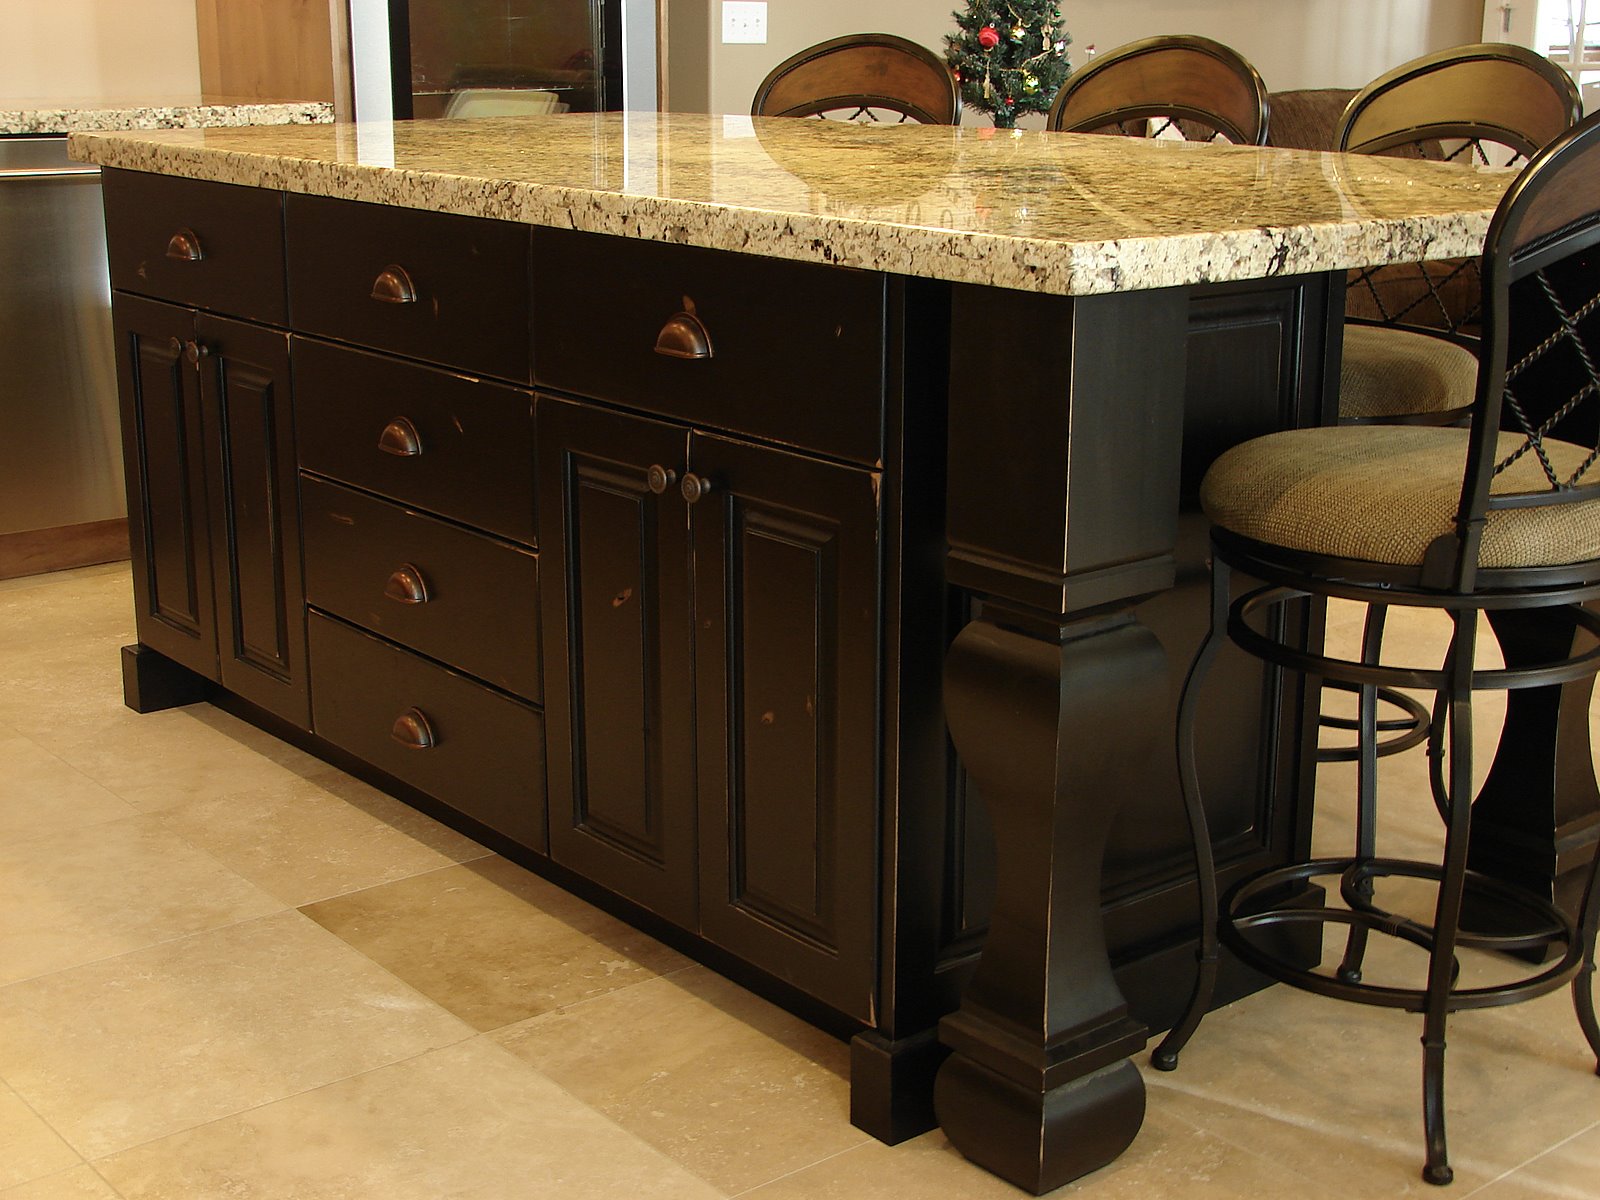 LEC Cabinets: Rustic Knotty Alder Cabinets